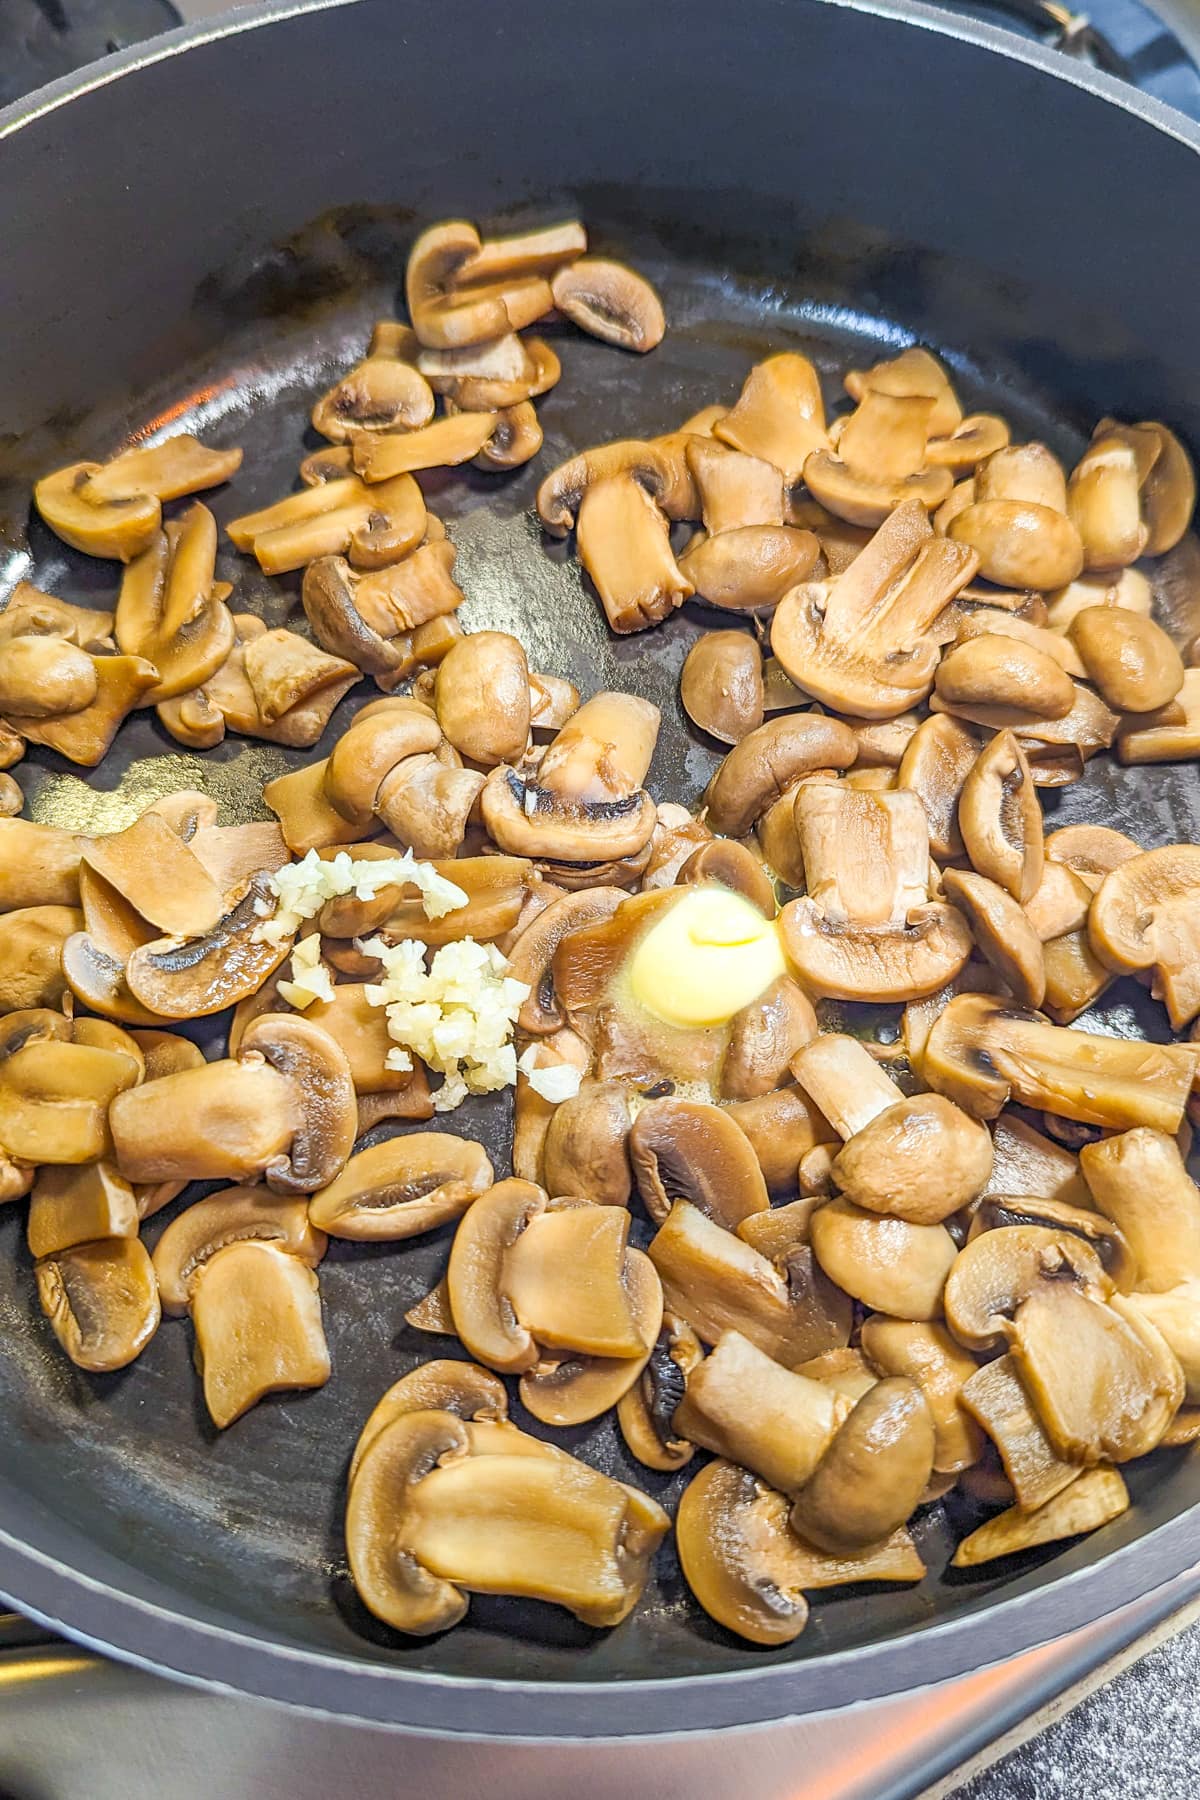 Frying pan with fried mushrooms, garlic and melted butter on the stove.